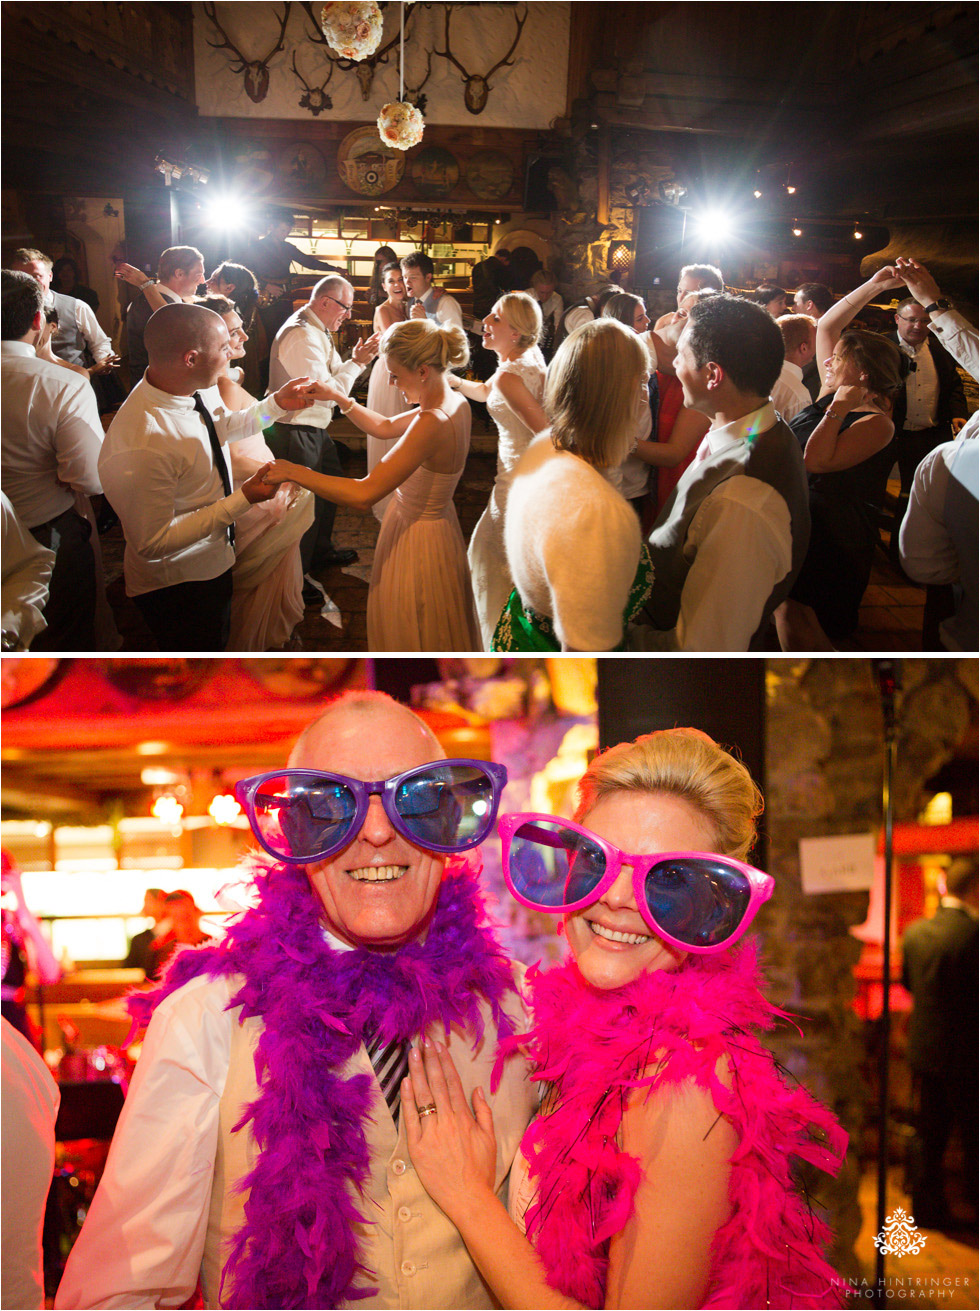 Arlberg Wedding at Gasthof Post, Lech and Hospiz Alm, St. Christoph | Stag & Butterfly Theme - Blog of Nina Hintringer Photography - Wedding Photography, Wedding Reportage and Destination Weddings